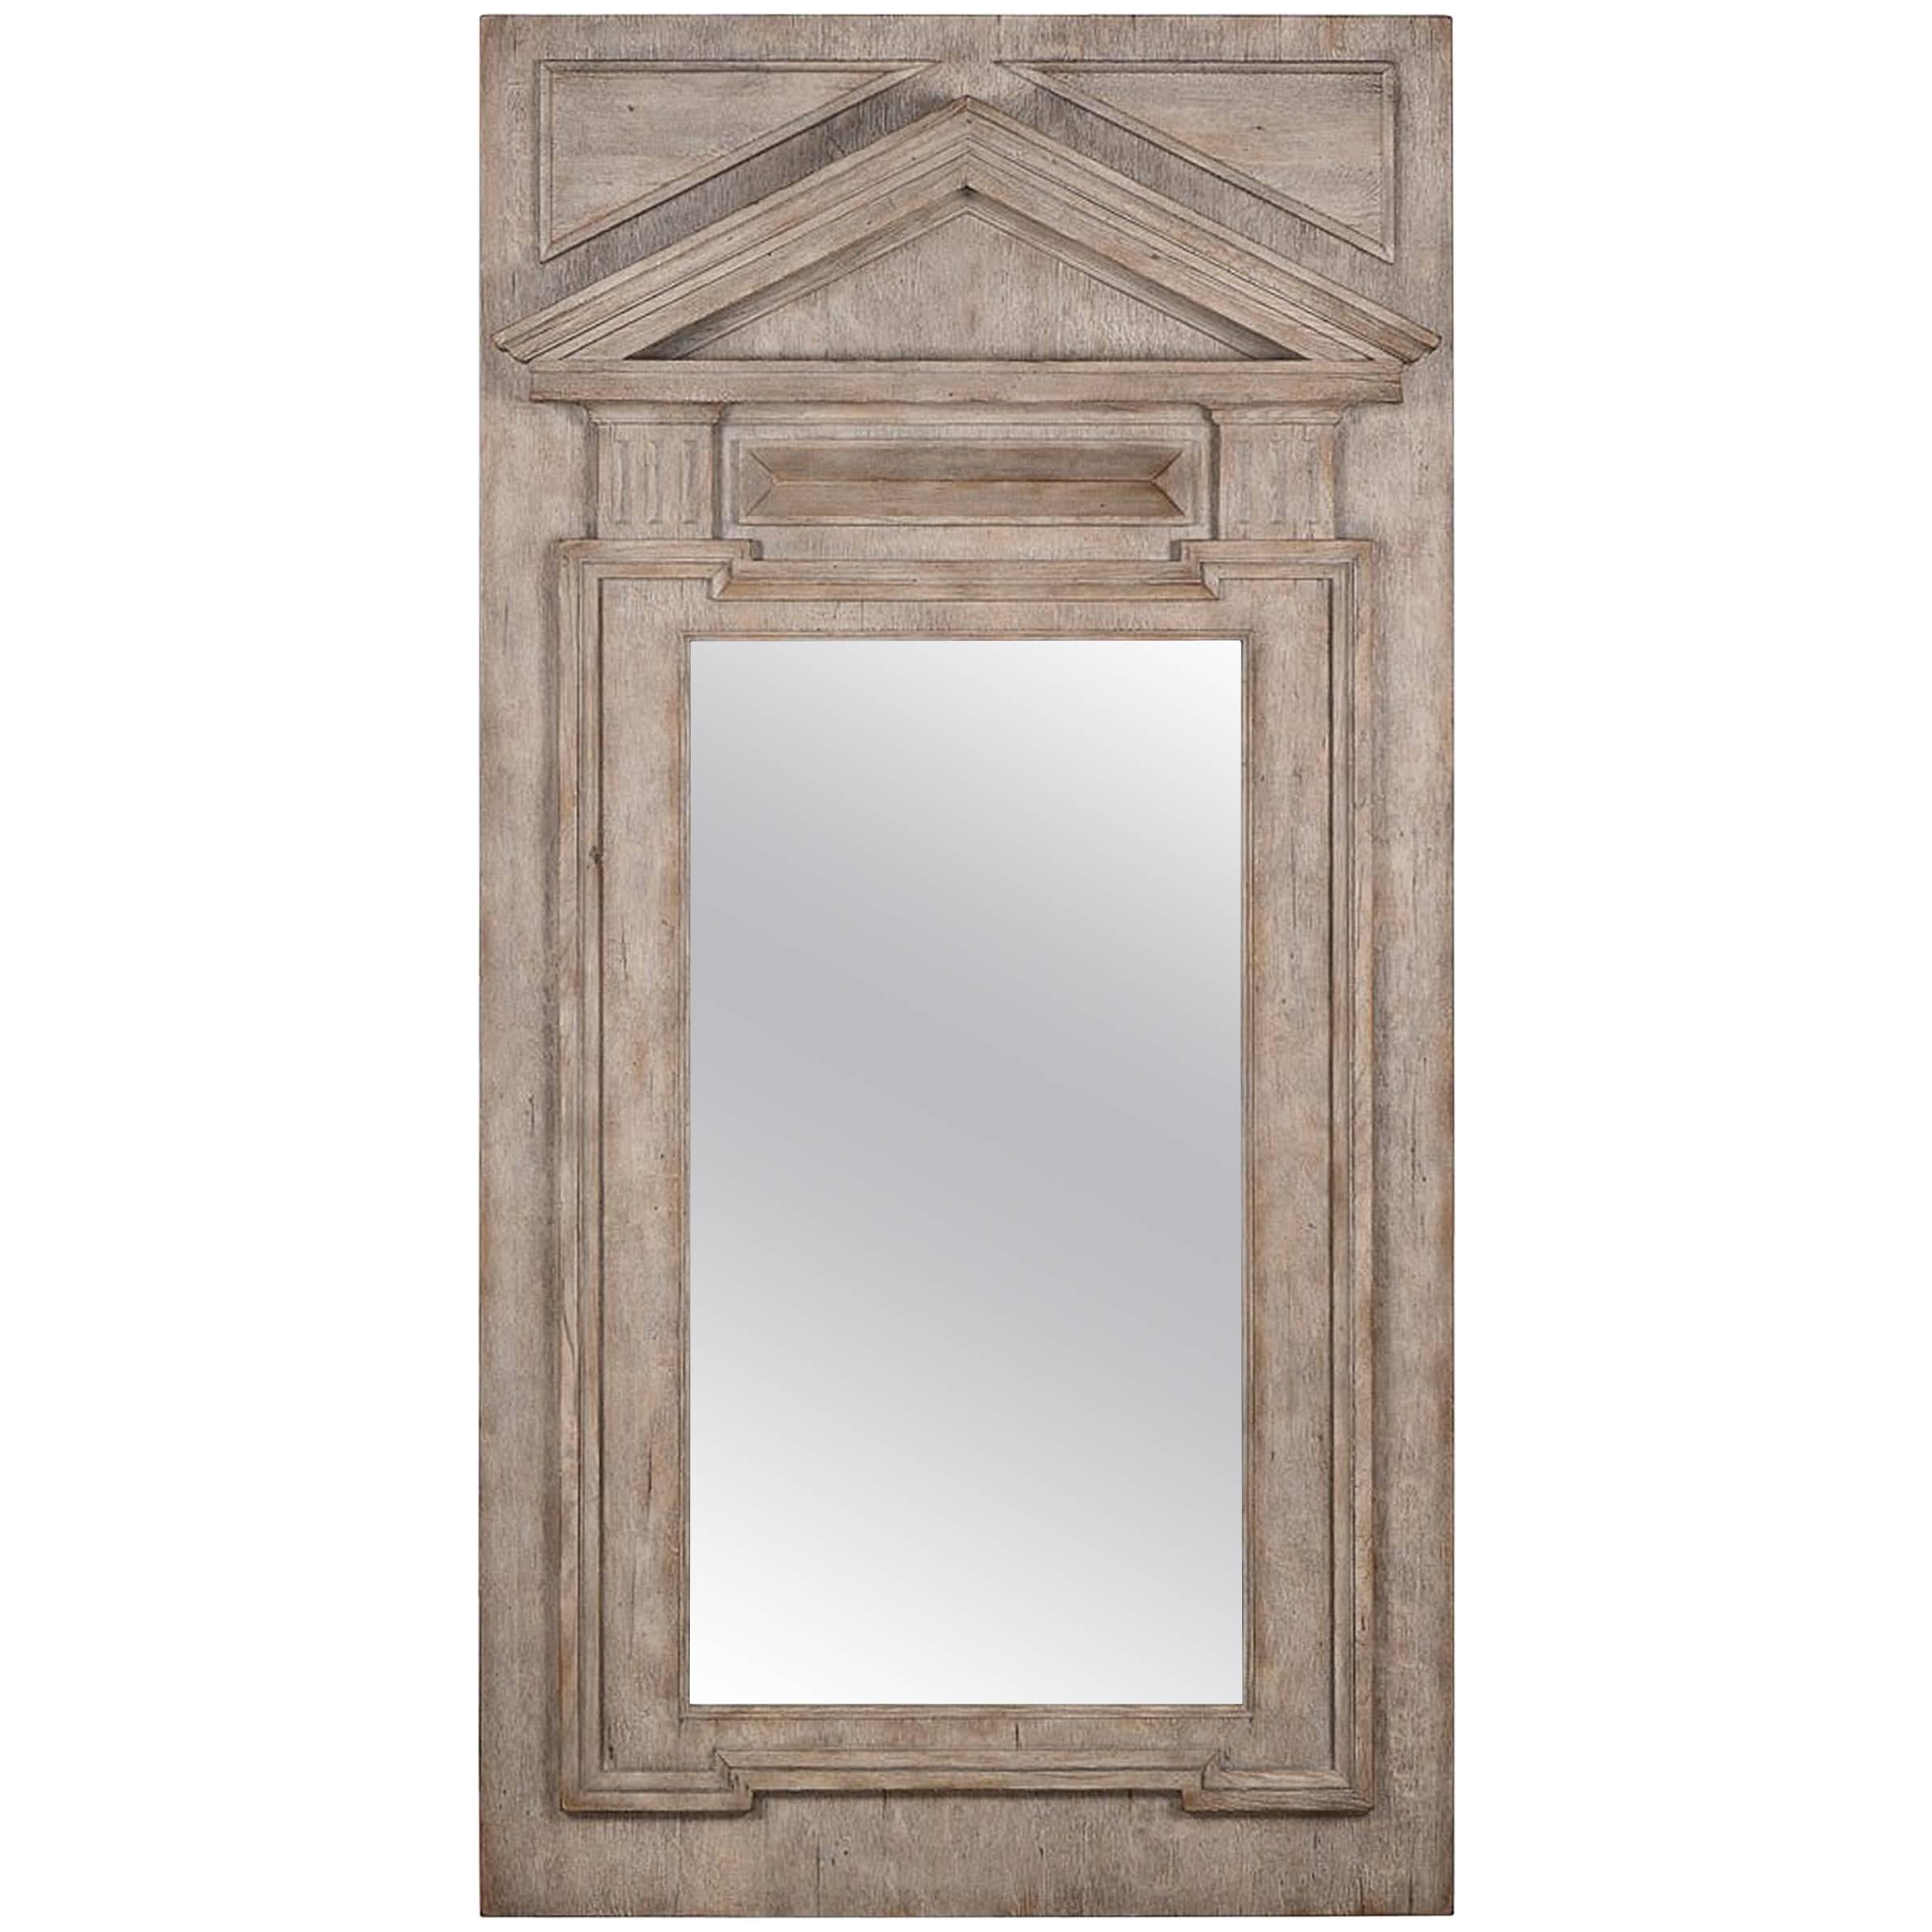 Fronton Mirror Glass in Handwork Driftwood Neoclassic Style